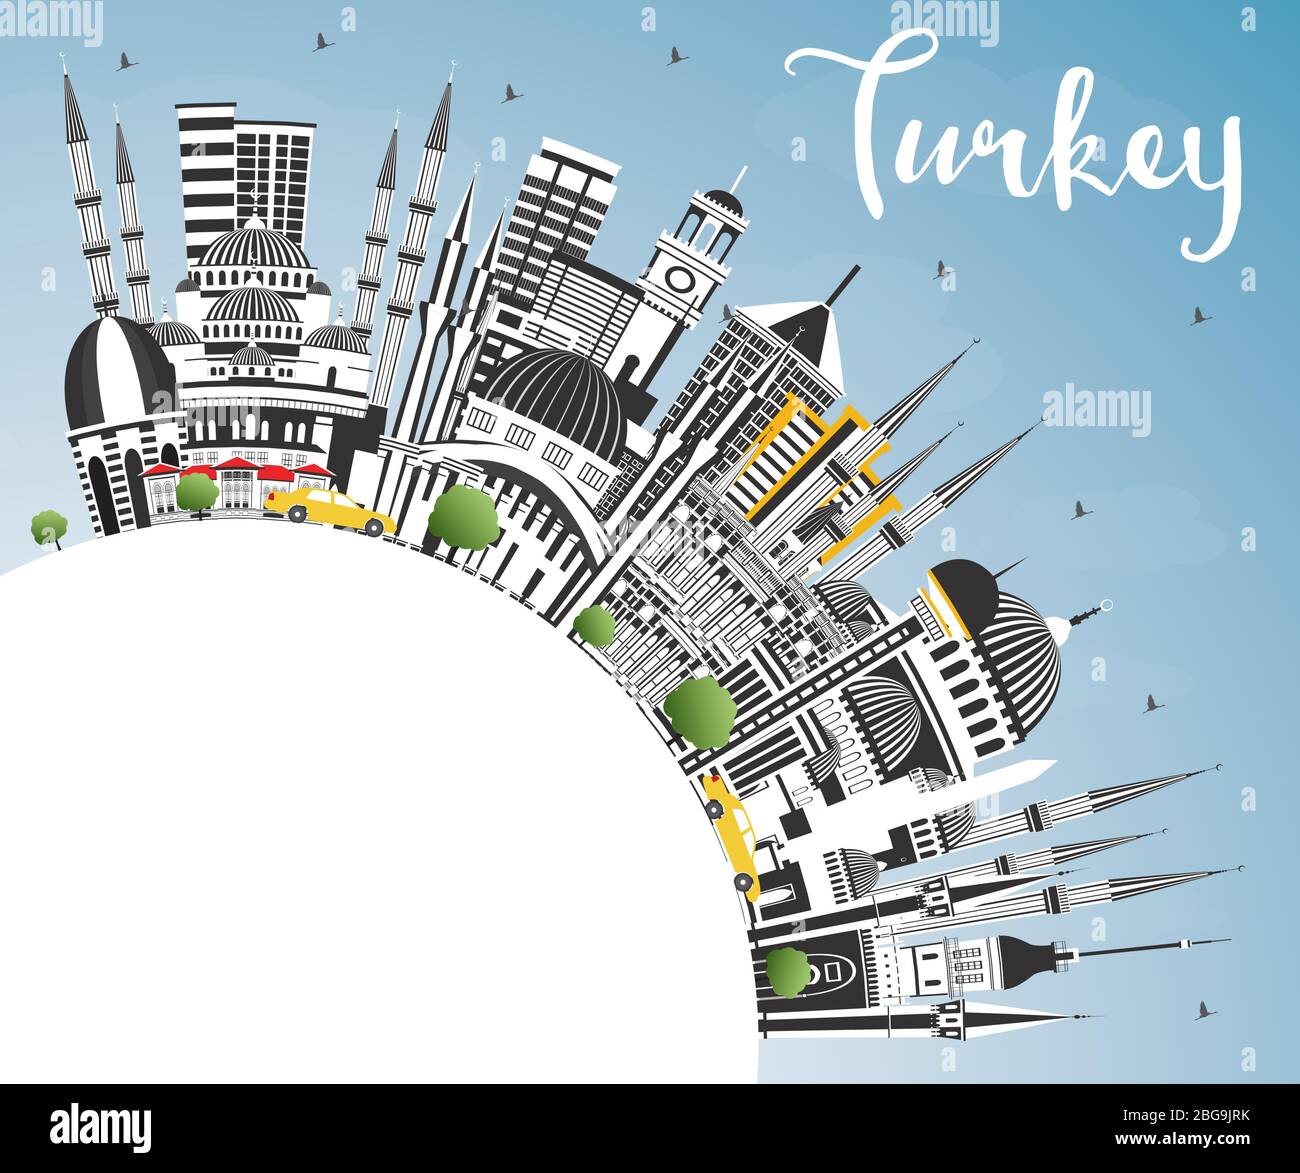 Turkey City Skyline with Gray Buildings, Blue Sky and Copy Space. Vector Illustration. Tourism Concept with Historic Architecture. Stock Vector